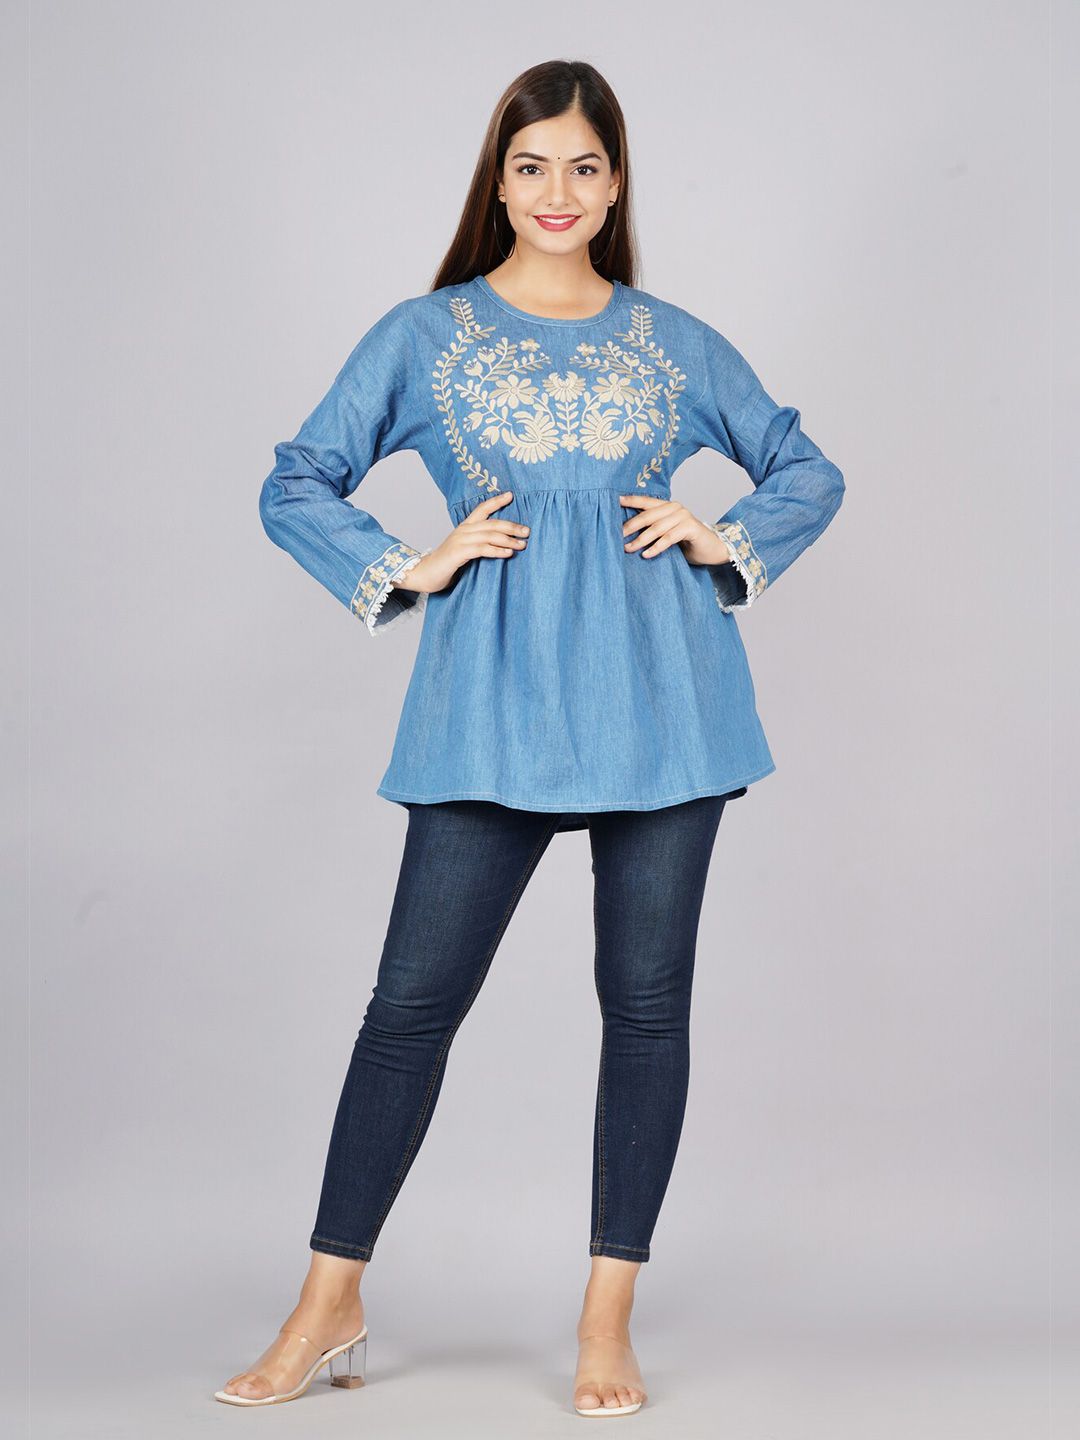 SUMAVI-FASHION Floral Embroidered Cinched Waist Denim Top Price in India